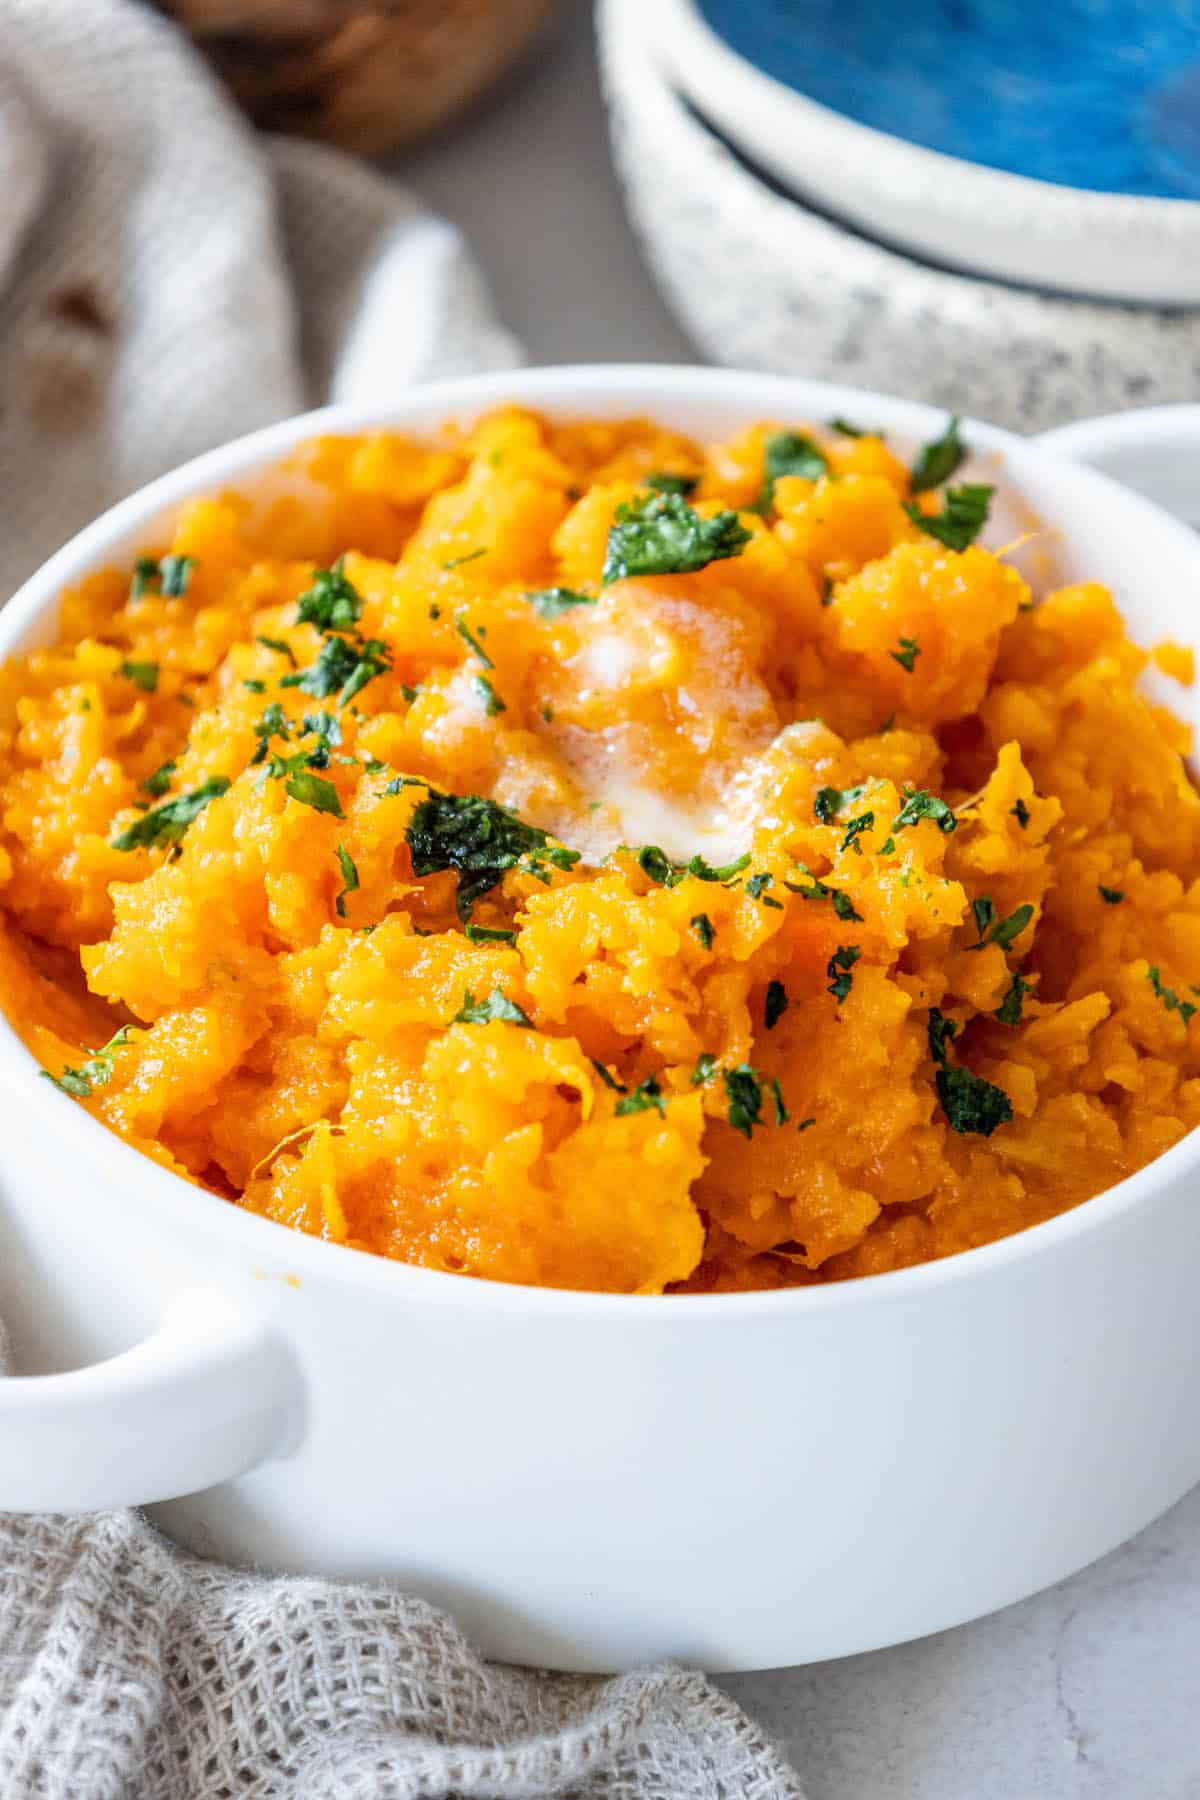 Mashed sweet potatoes in a bowl.